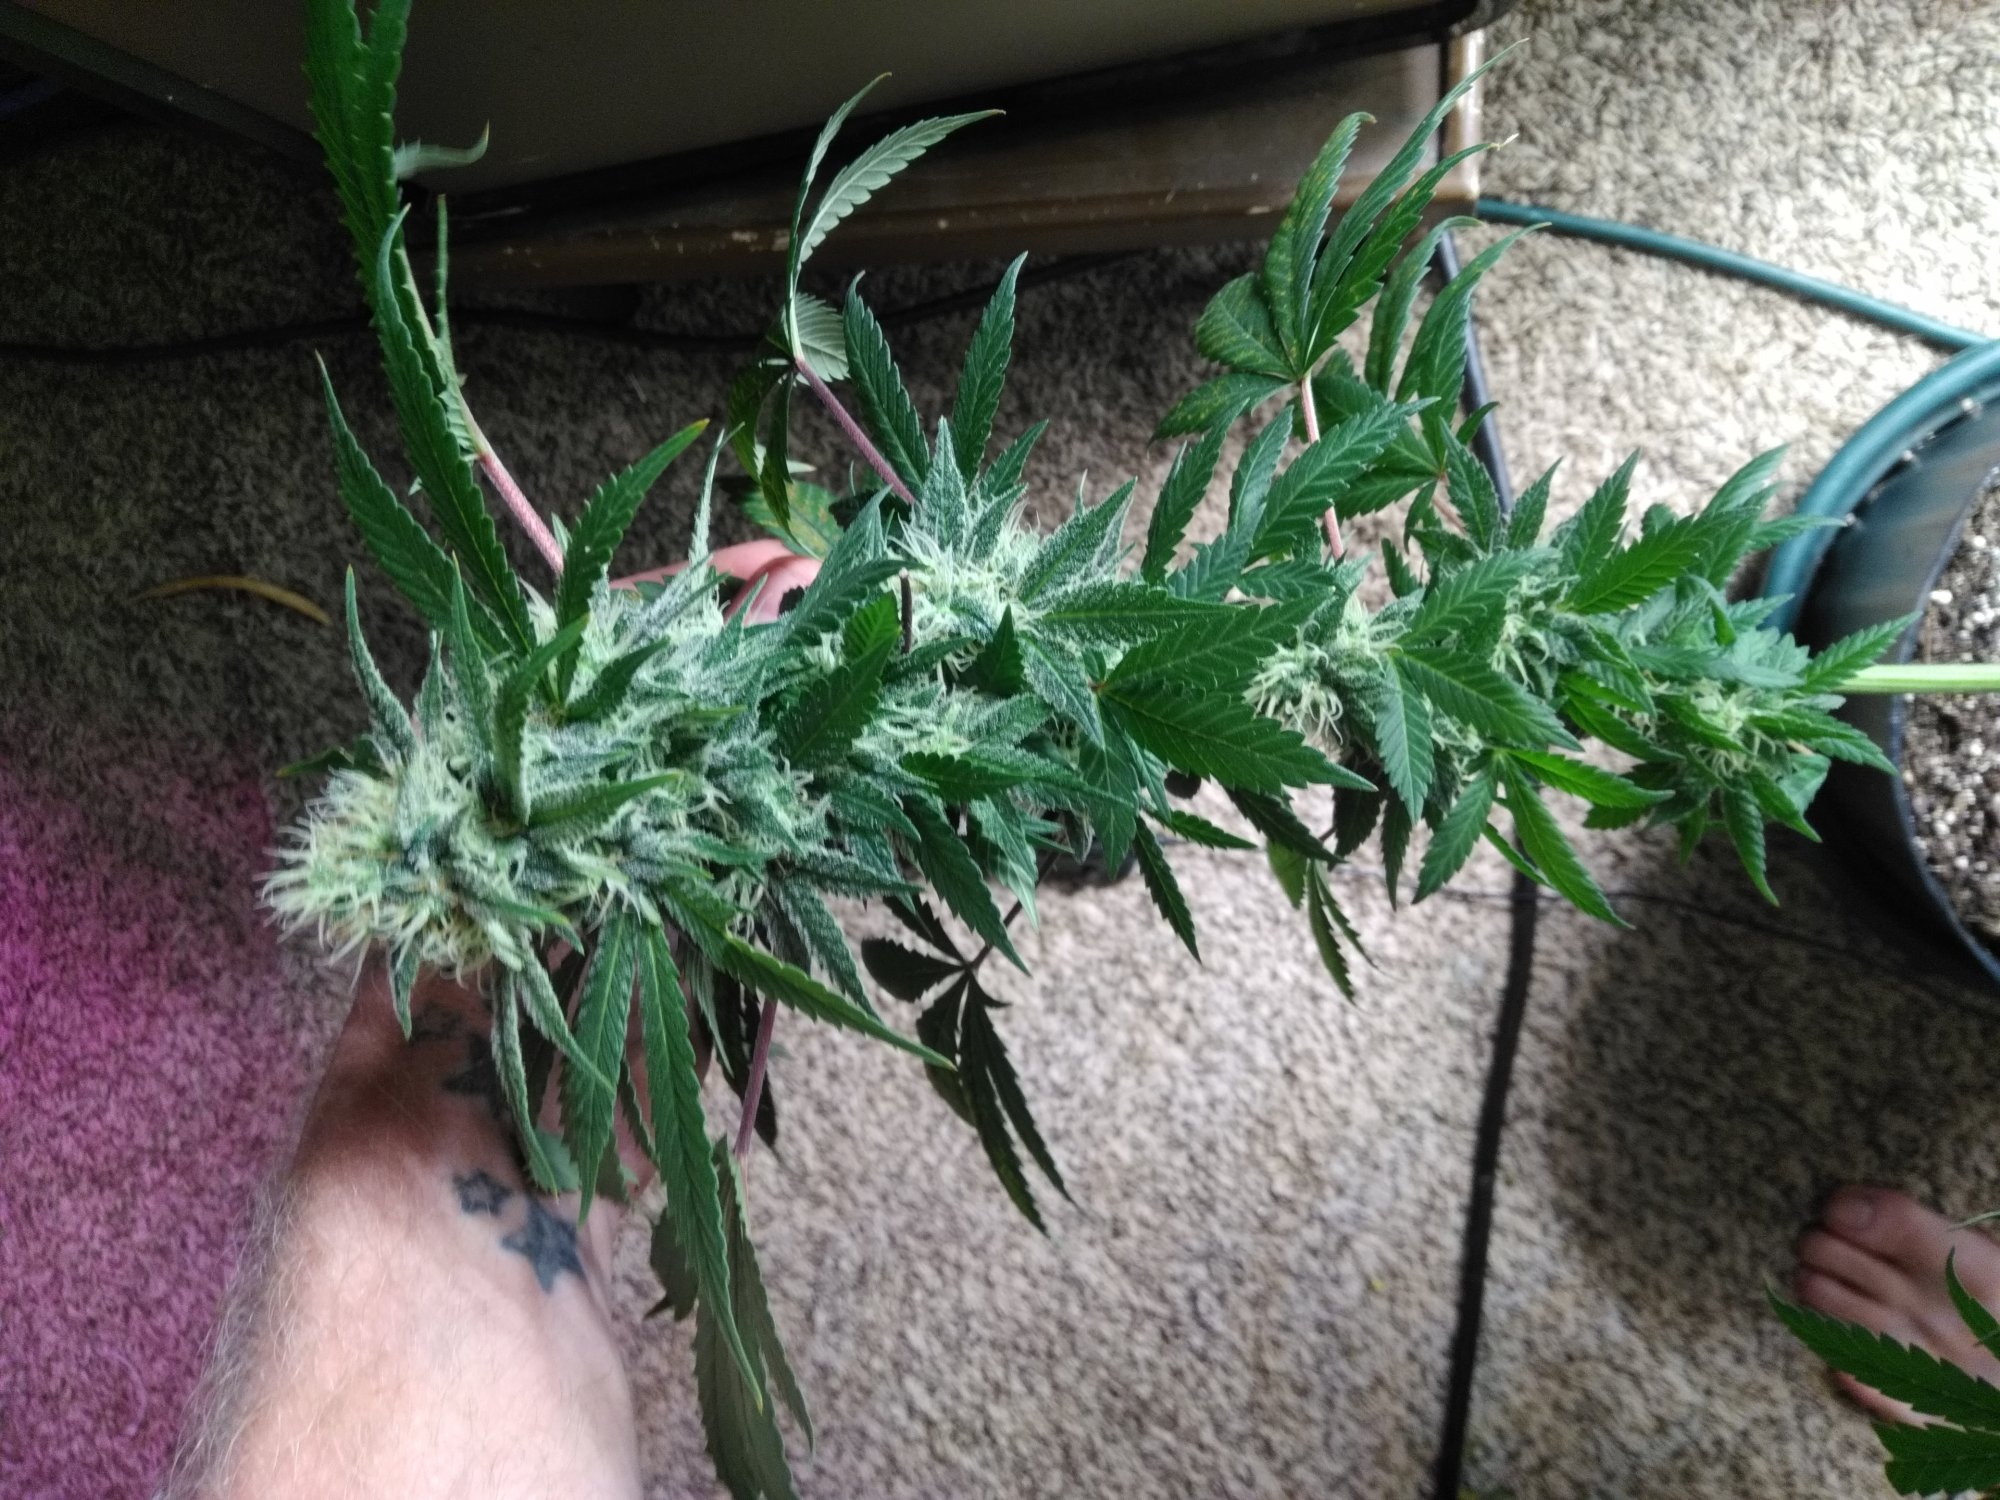 Check me out my biggest buds yet 8